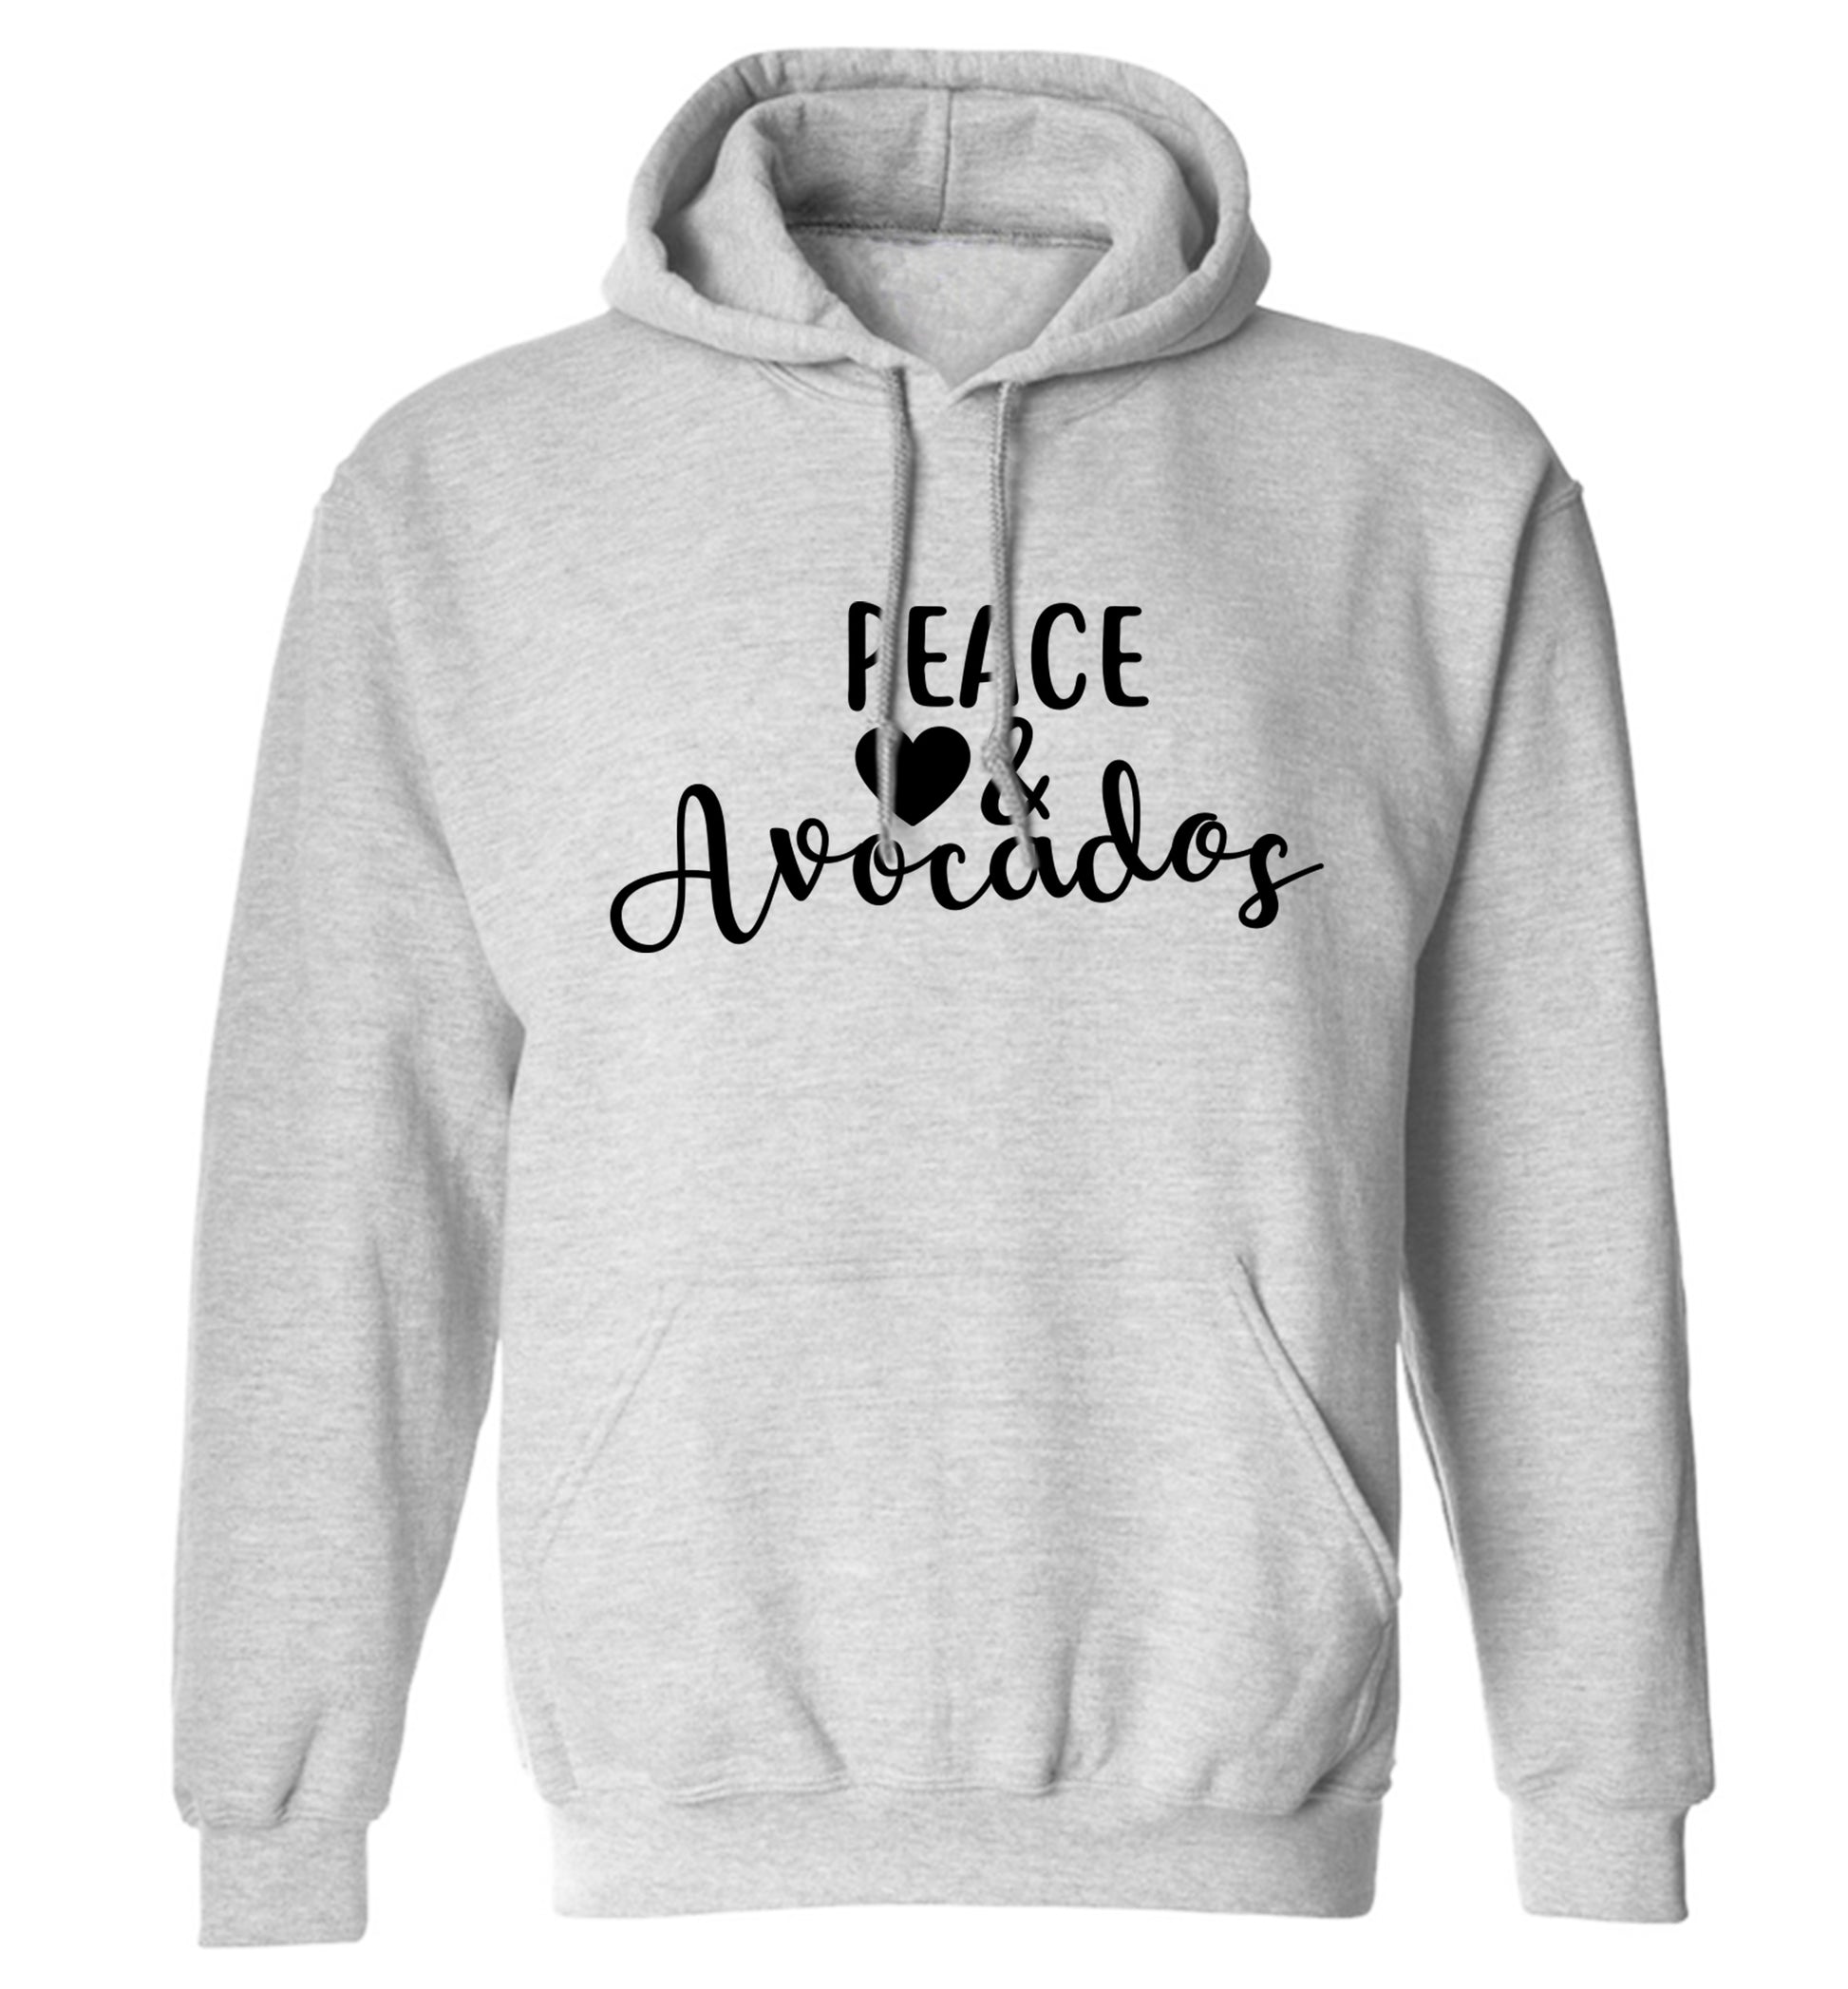 Peace love and avocados adults unisex grey hoodie 2XL